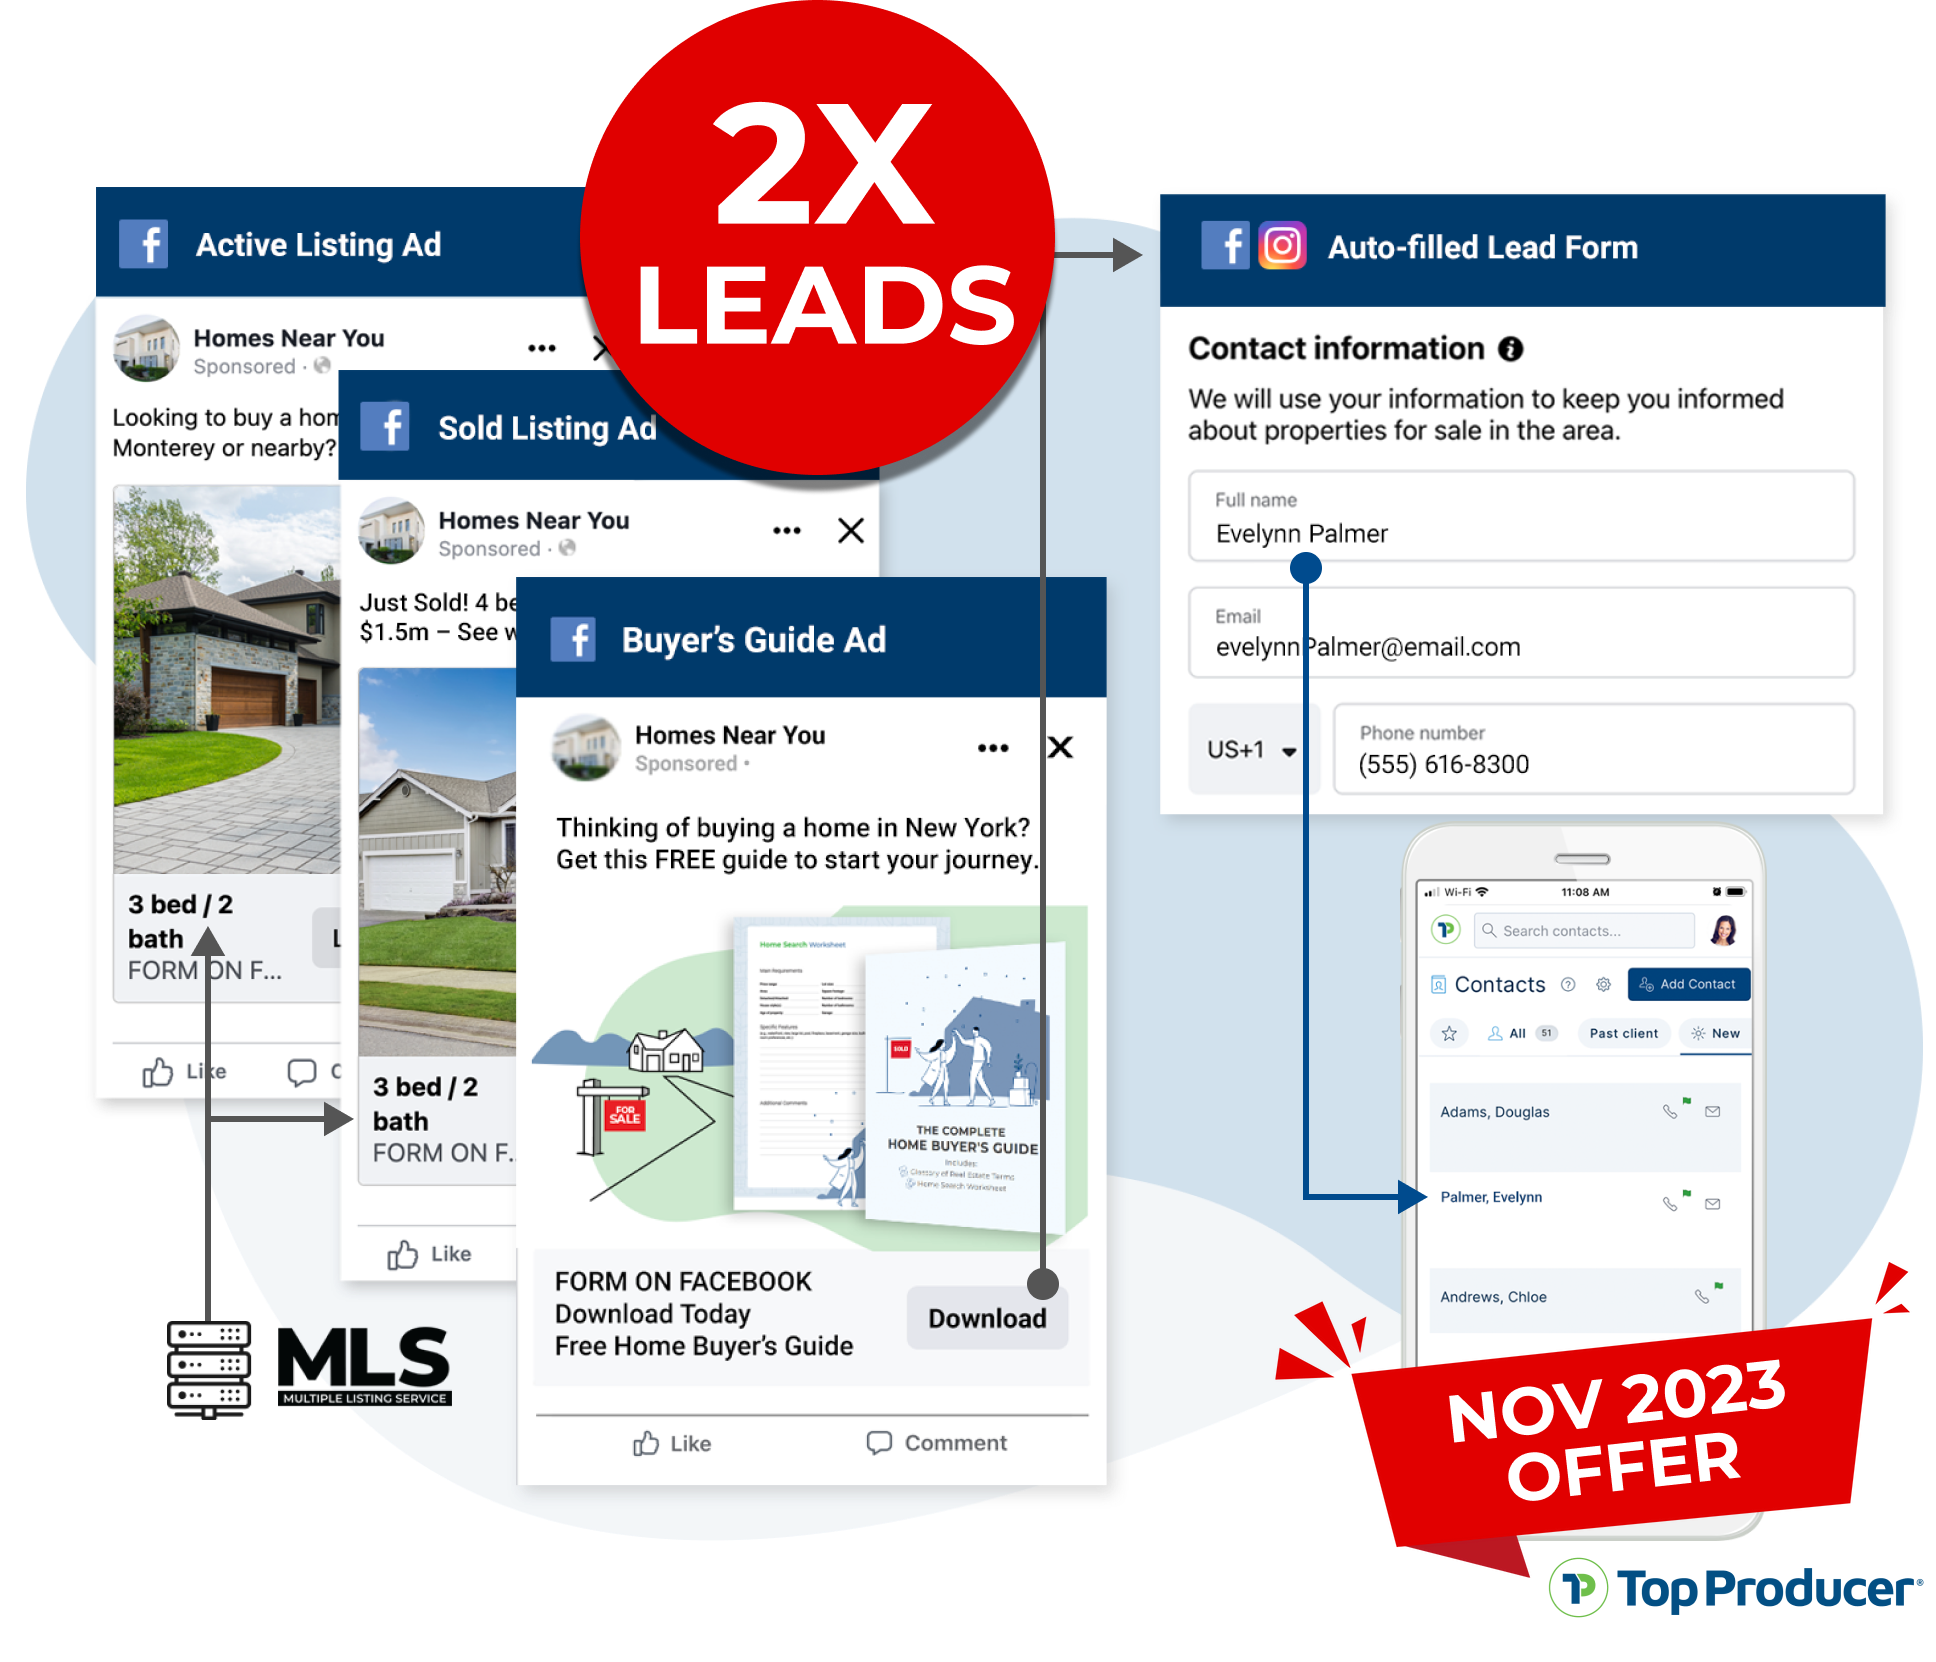 SC ad - double your leads